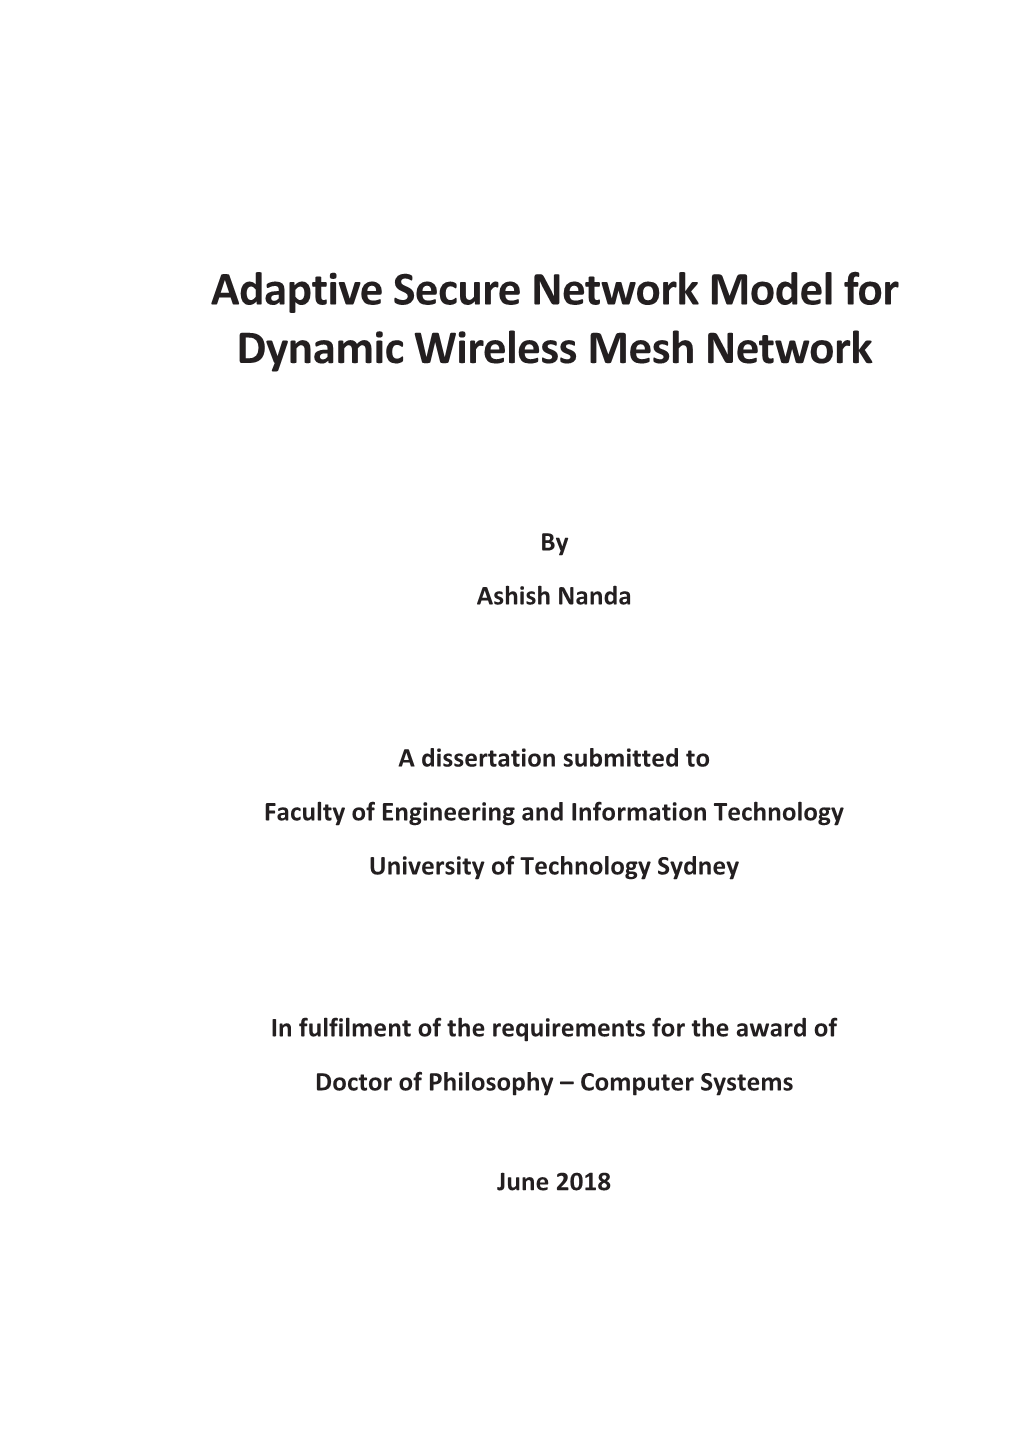 Adaptive Secure Network Model for Dynamic Wireless Mesh Network